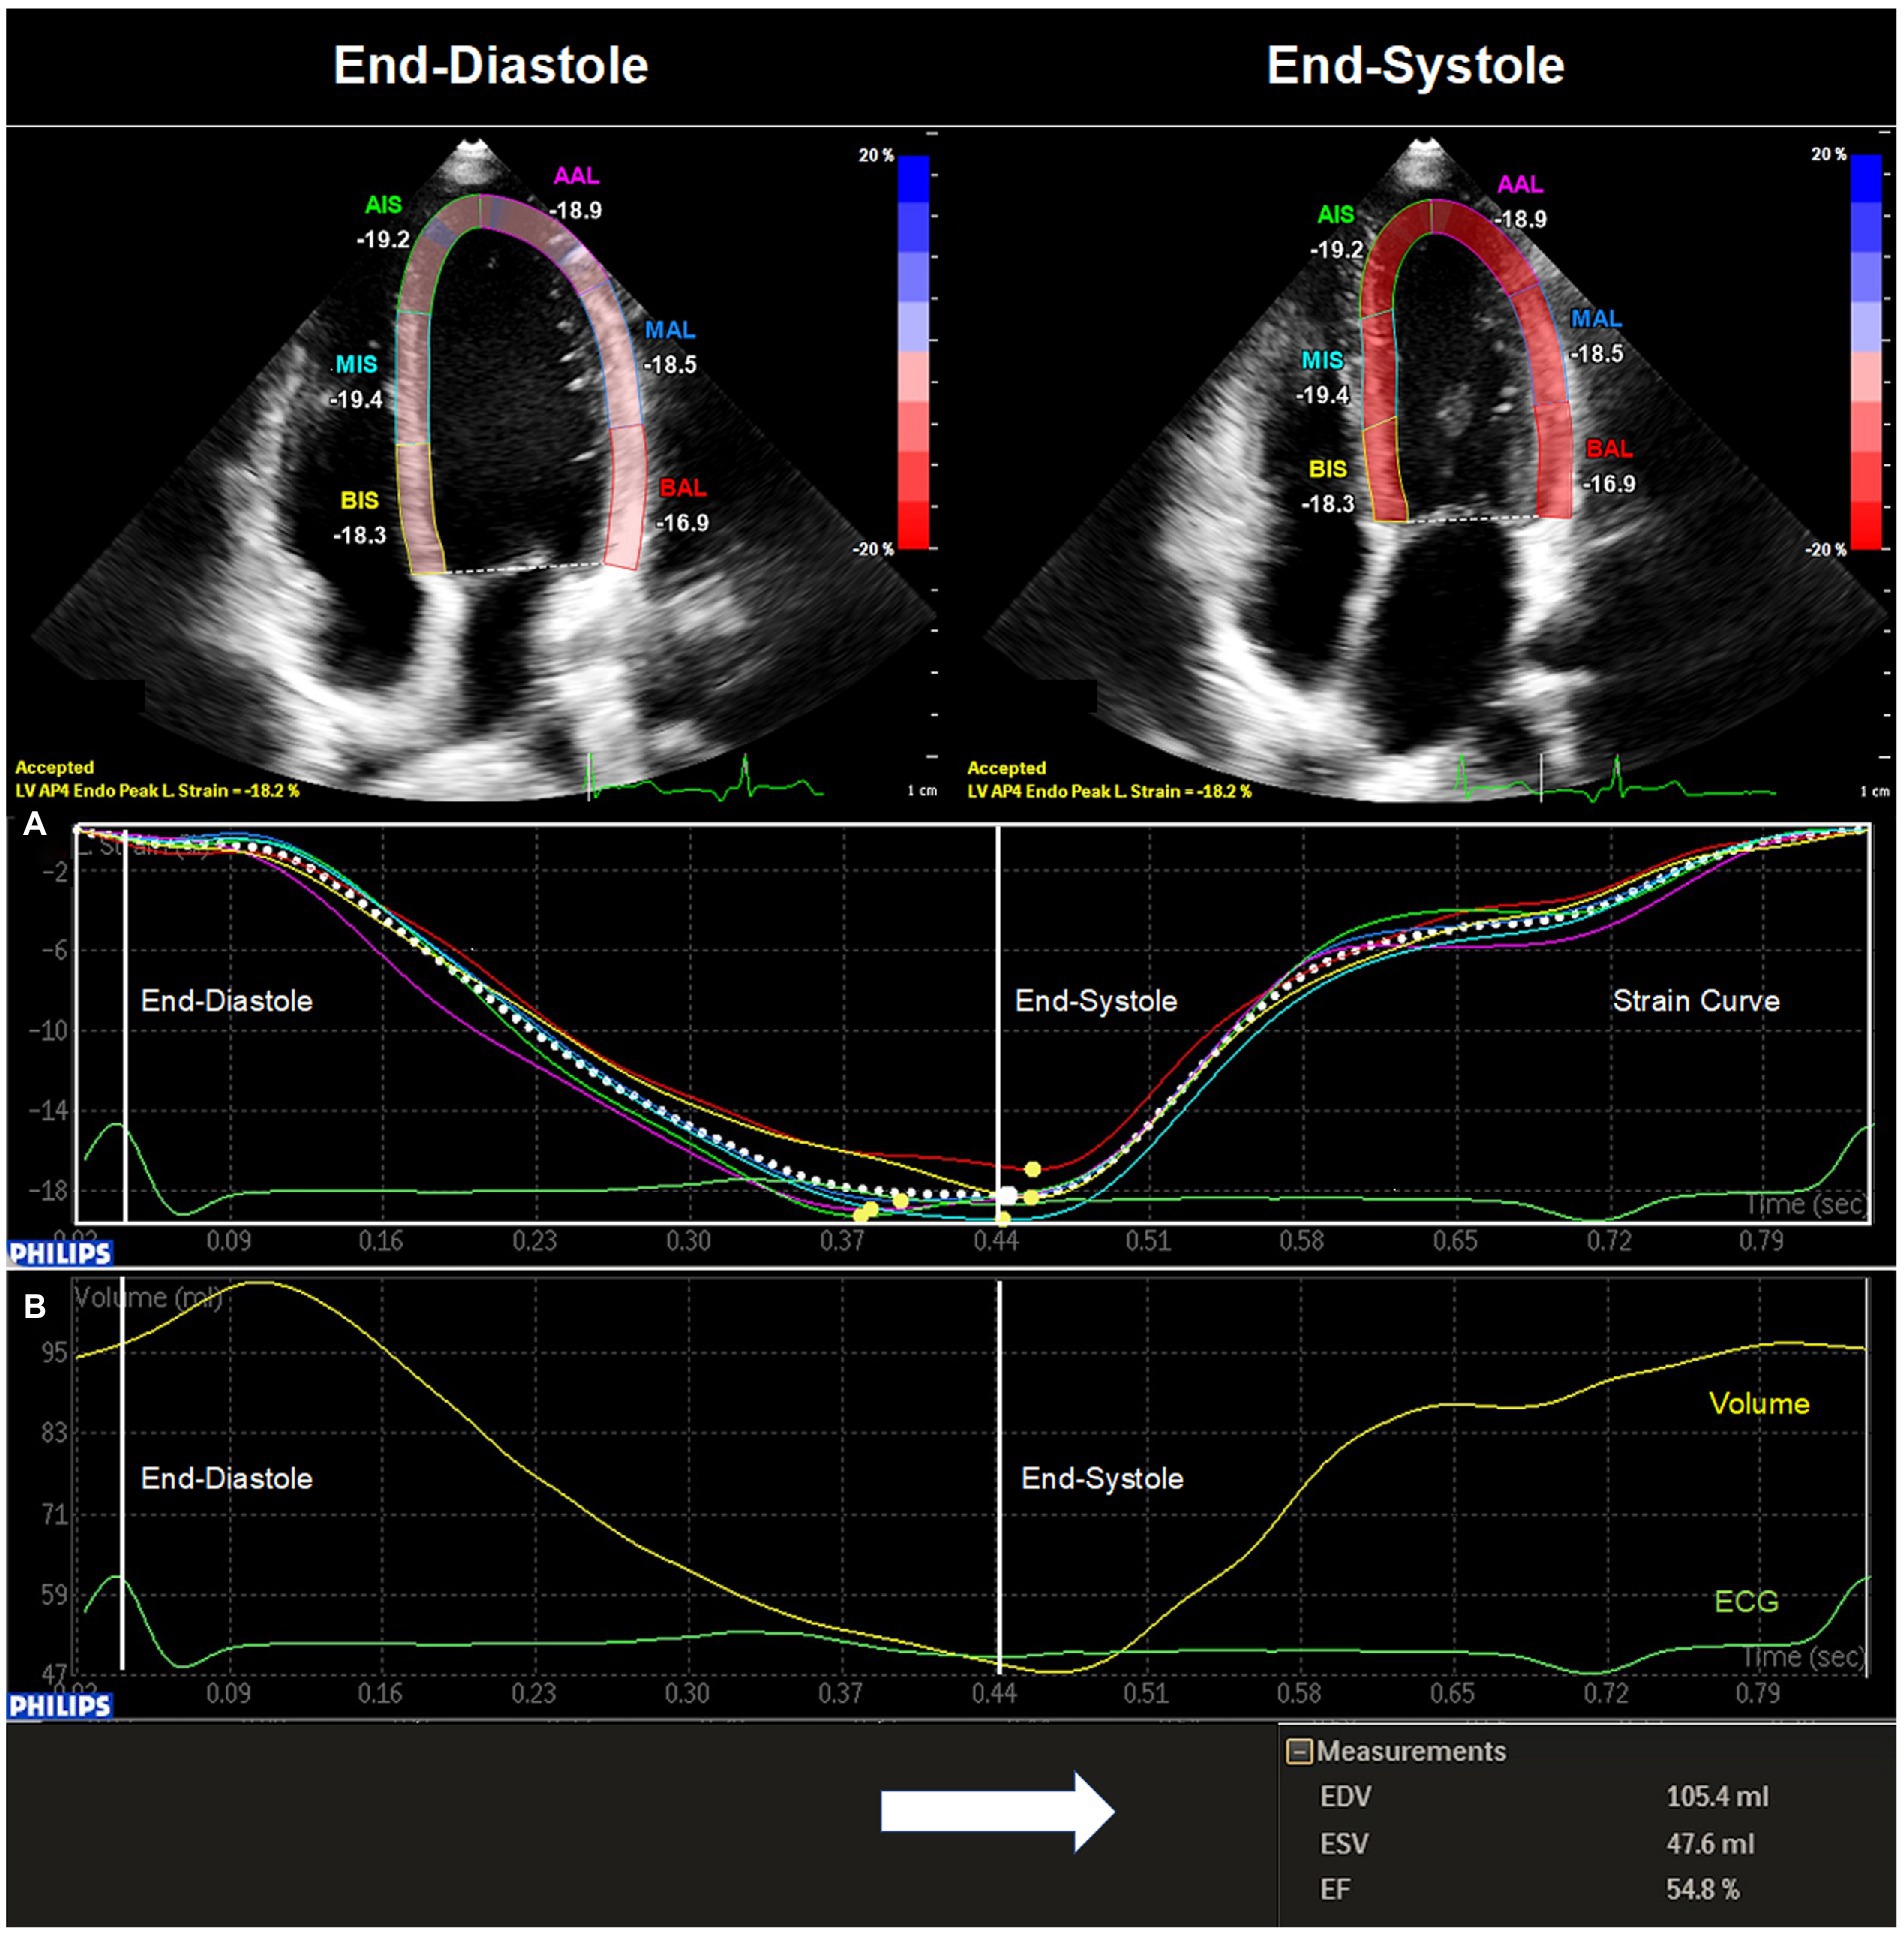 Speckle-tracking echocardiography. Semiautomatic calculation of global